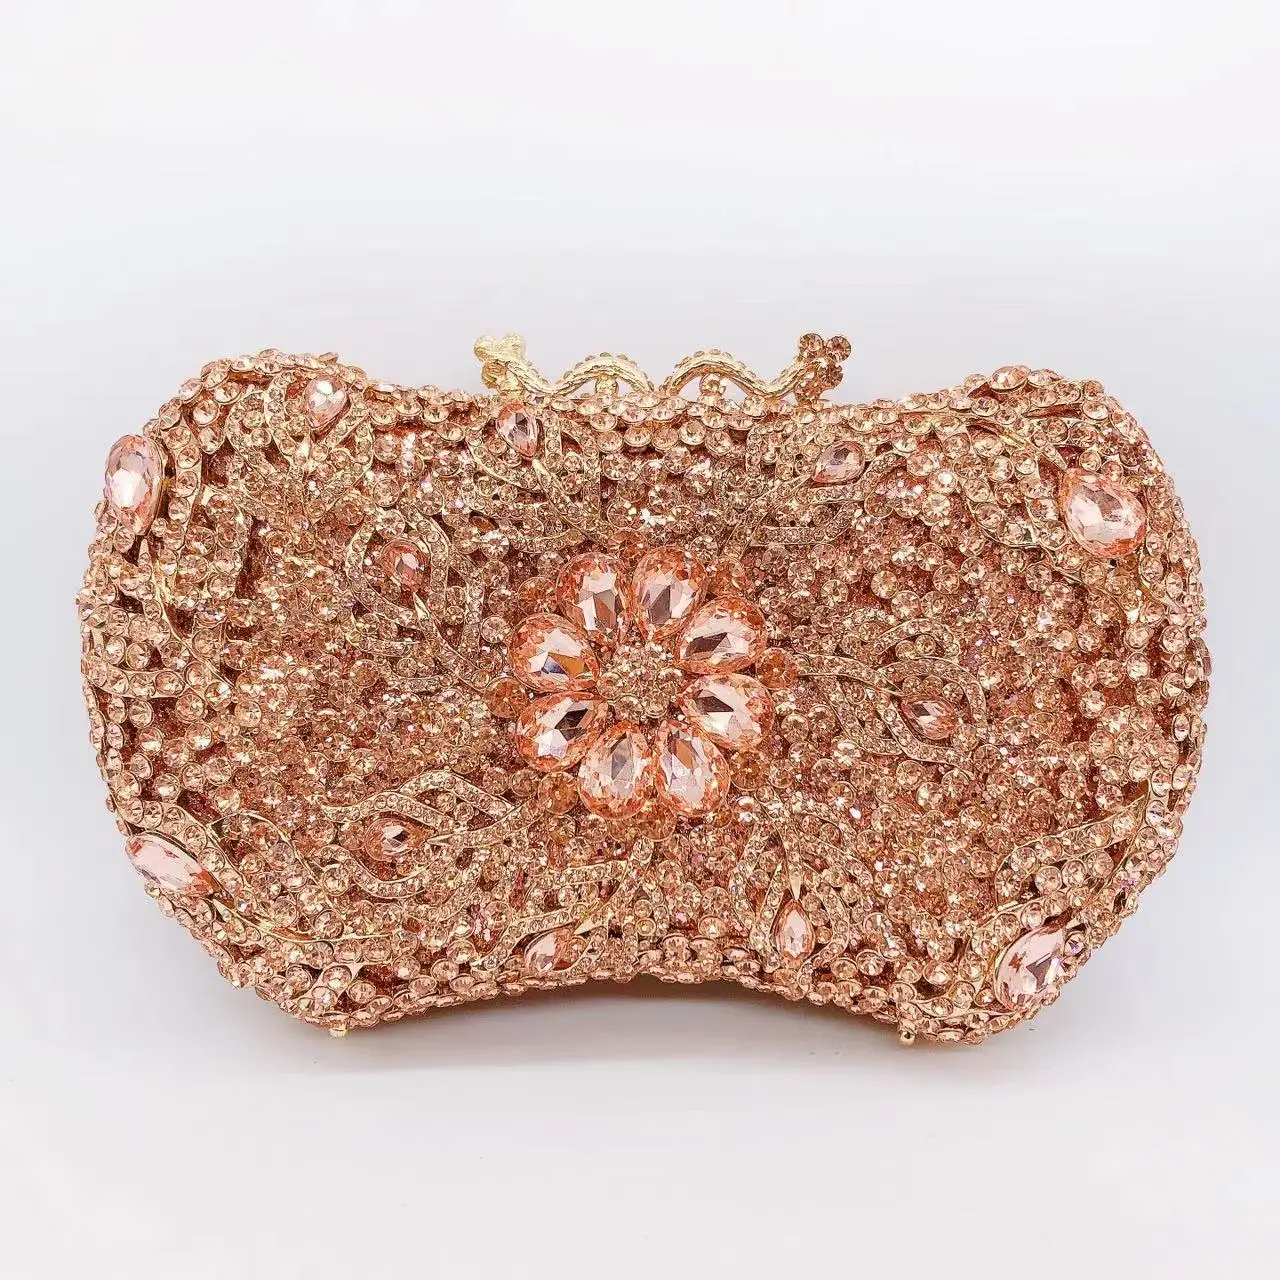 Amiqi MRY77 Beautiful Chain Diamond Rhinestone Evening Clutch Crystal Purse Bling Glitter Gold Bags For Evening Parties